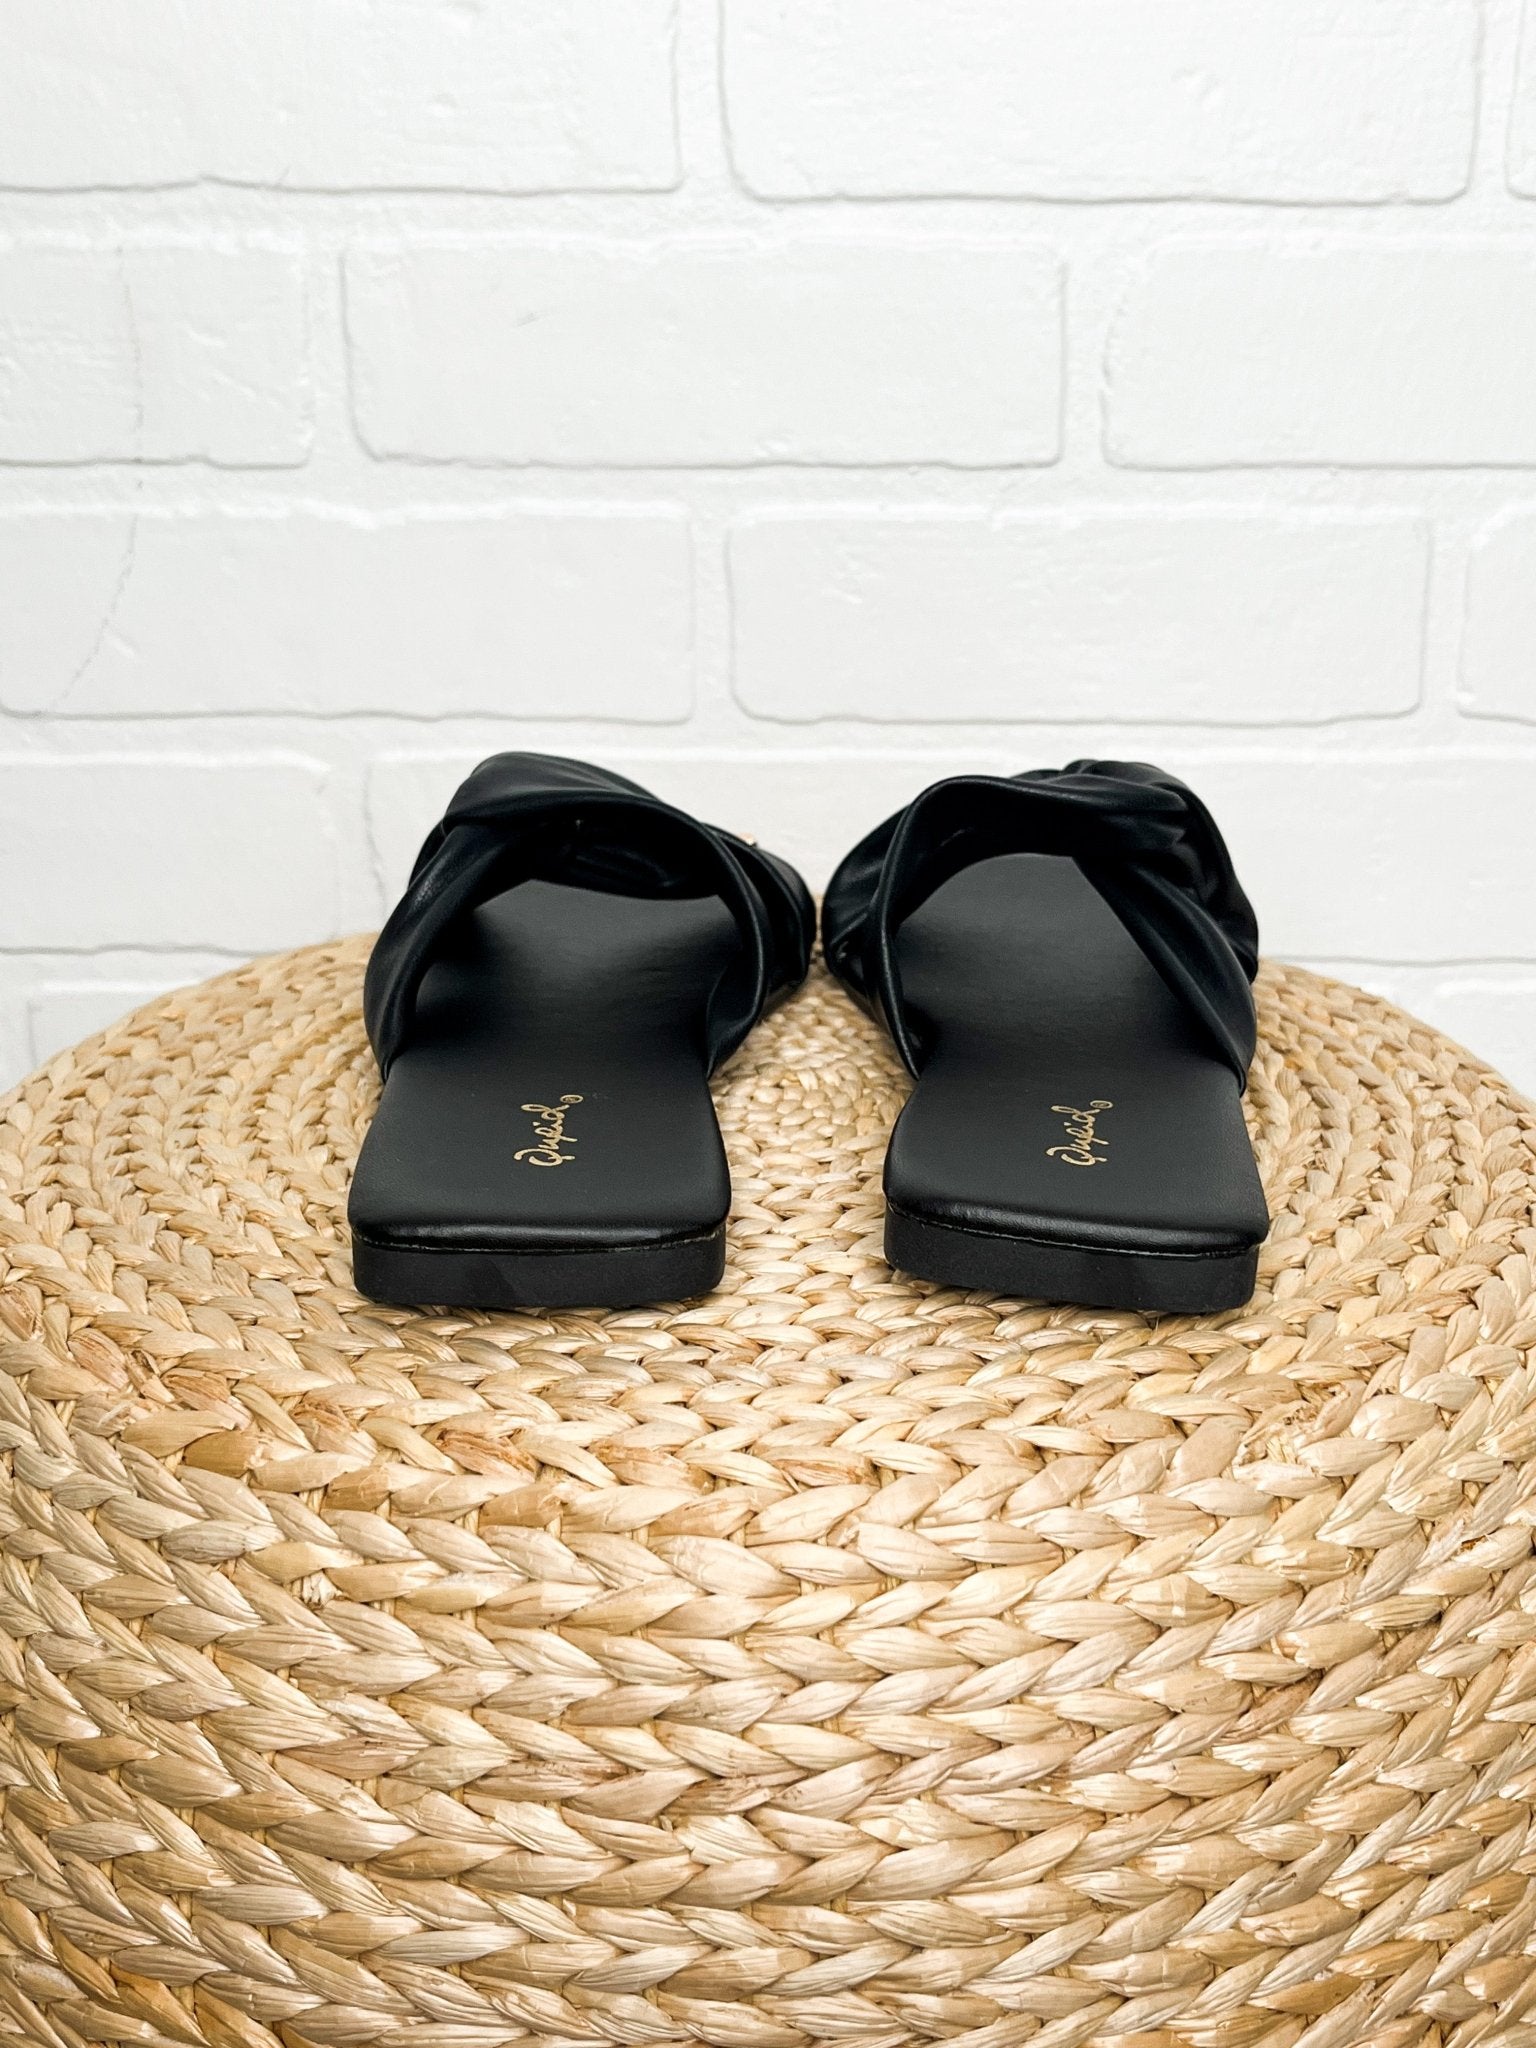 Aster ruched cross sandal black Stylish shoes - Womens Fashion Shoes at Lush Fashion Lounge Boutique in Oklahoma City